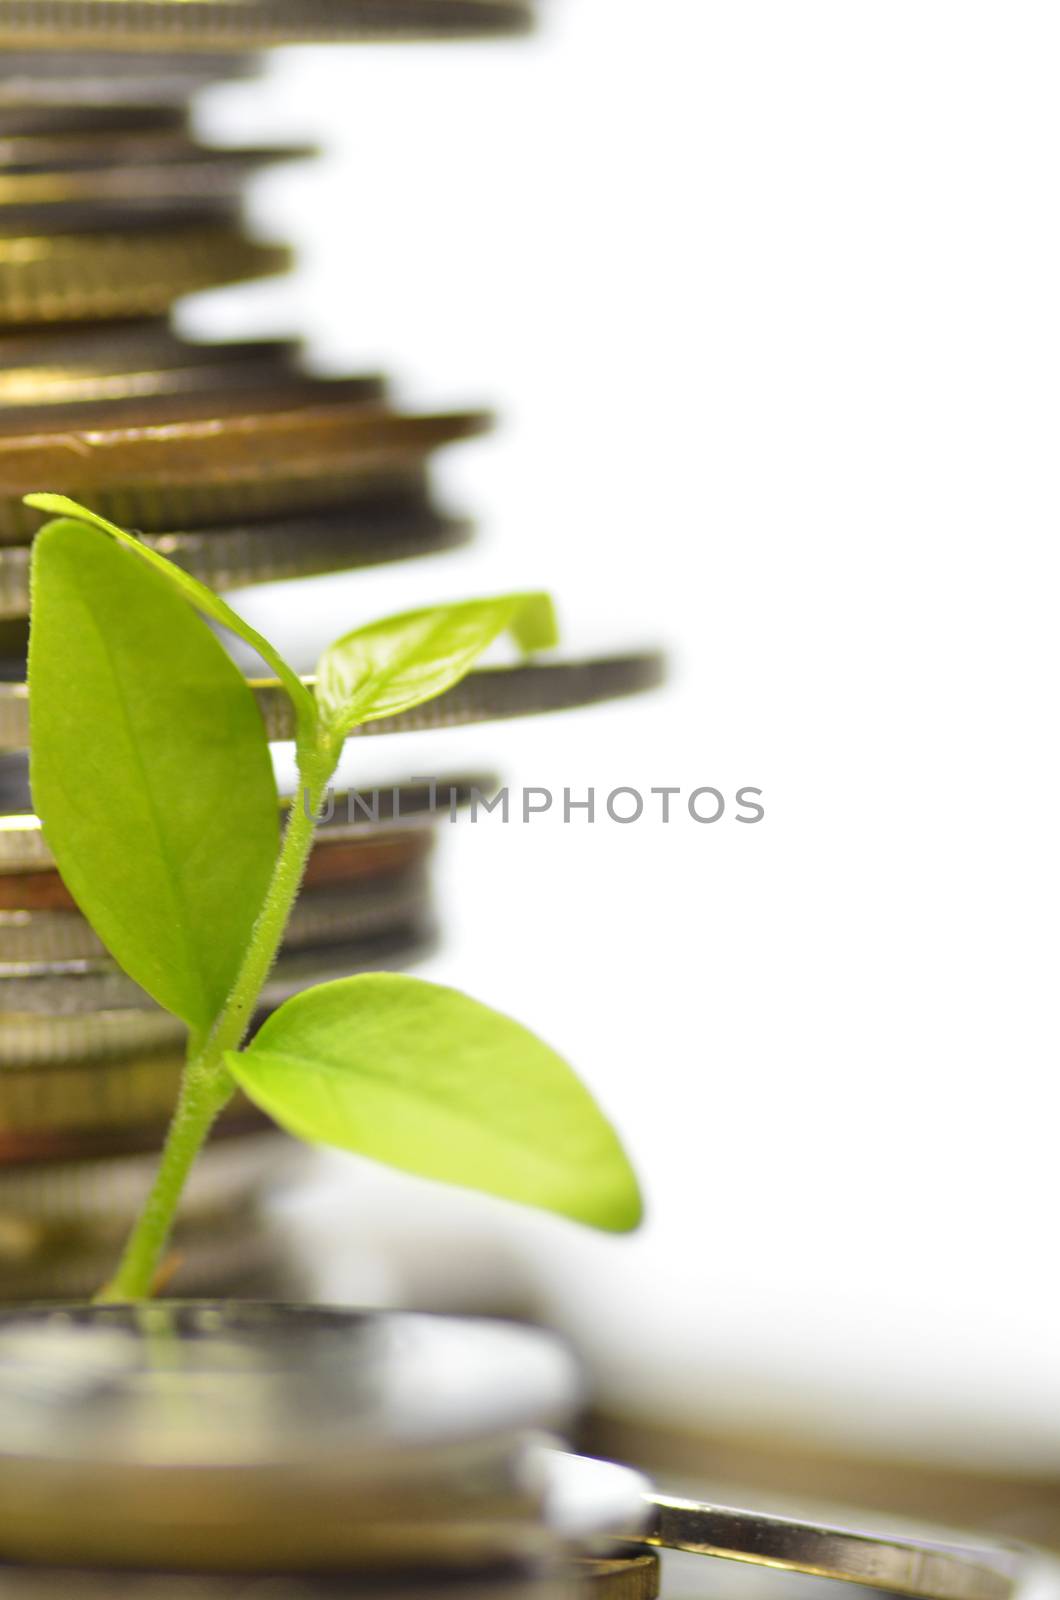 Plant and lot of coins by tang90246